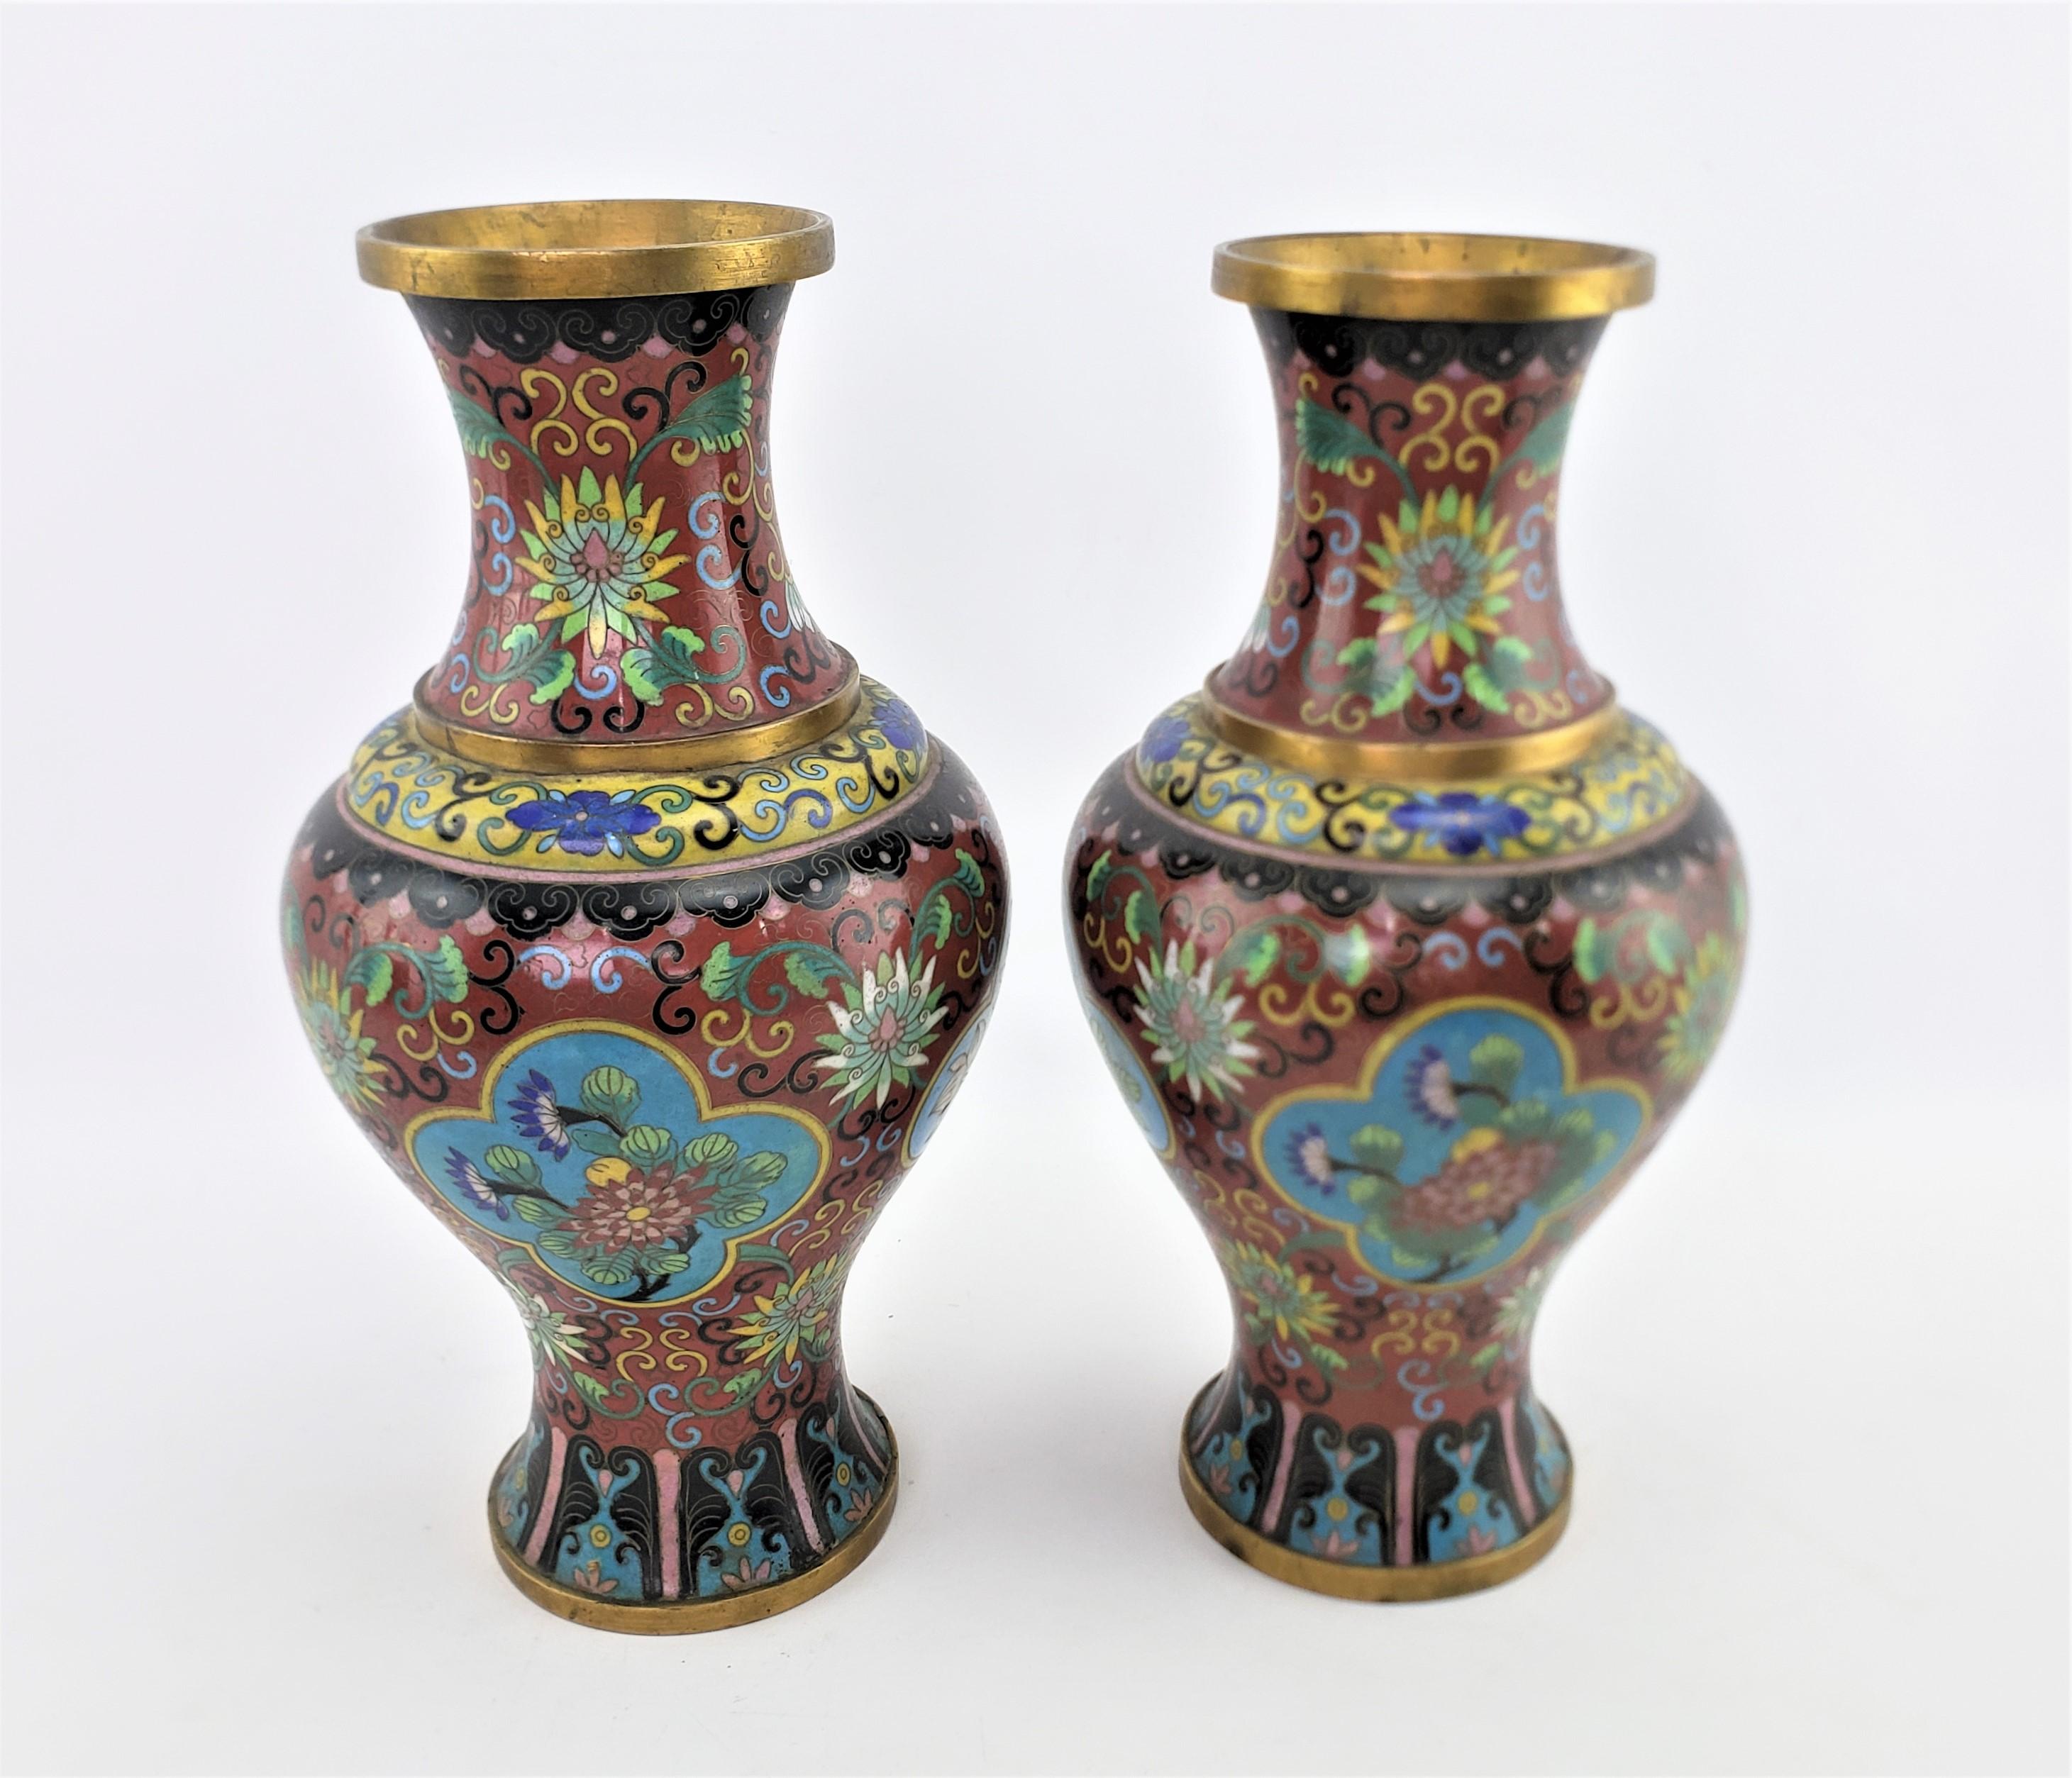 Pair of Early Chinese Republic Era Cloisonne Vases with Stylized Floral Motif In Good Condition For Sale In Hamilton, Ontario